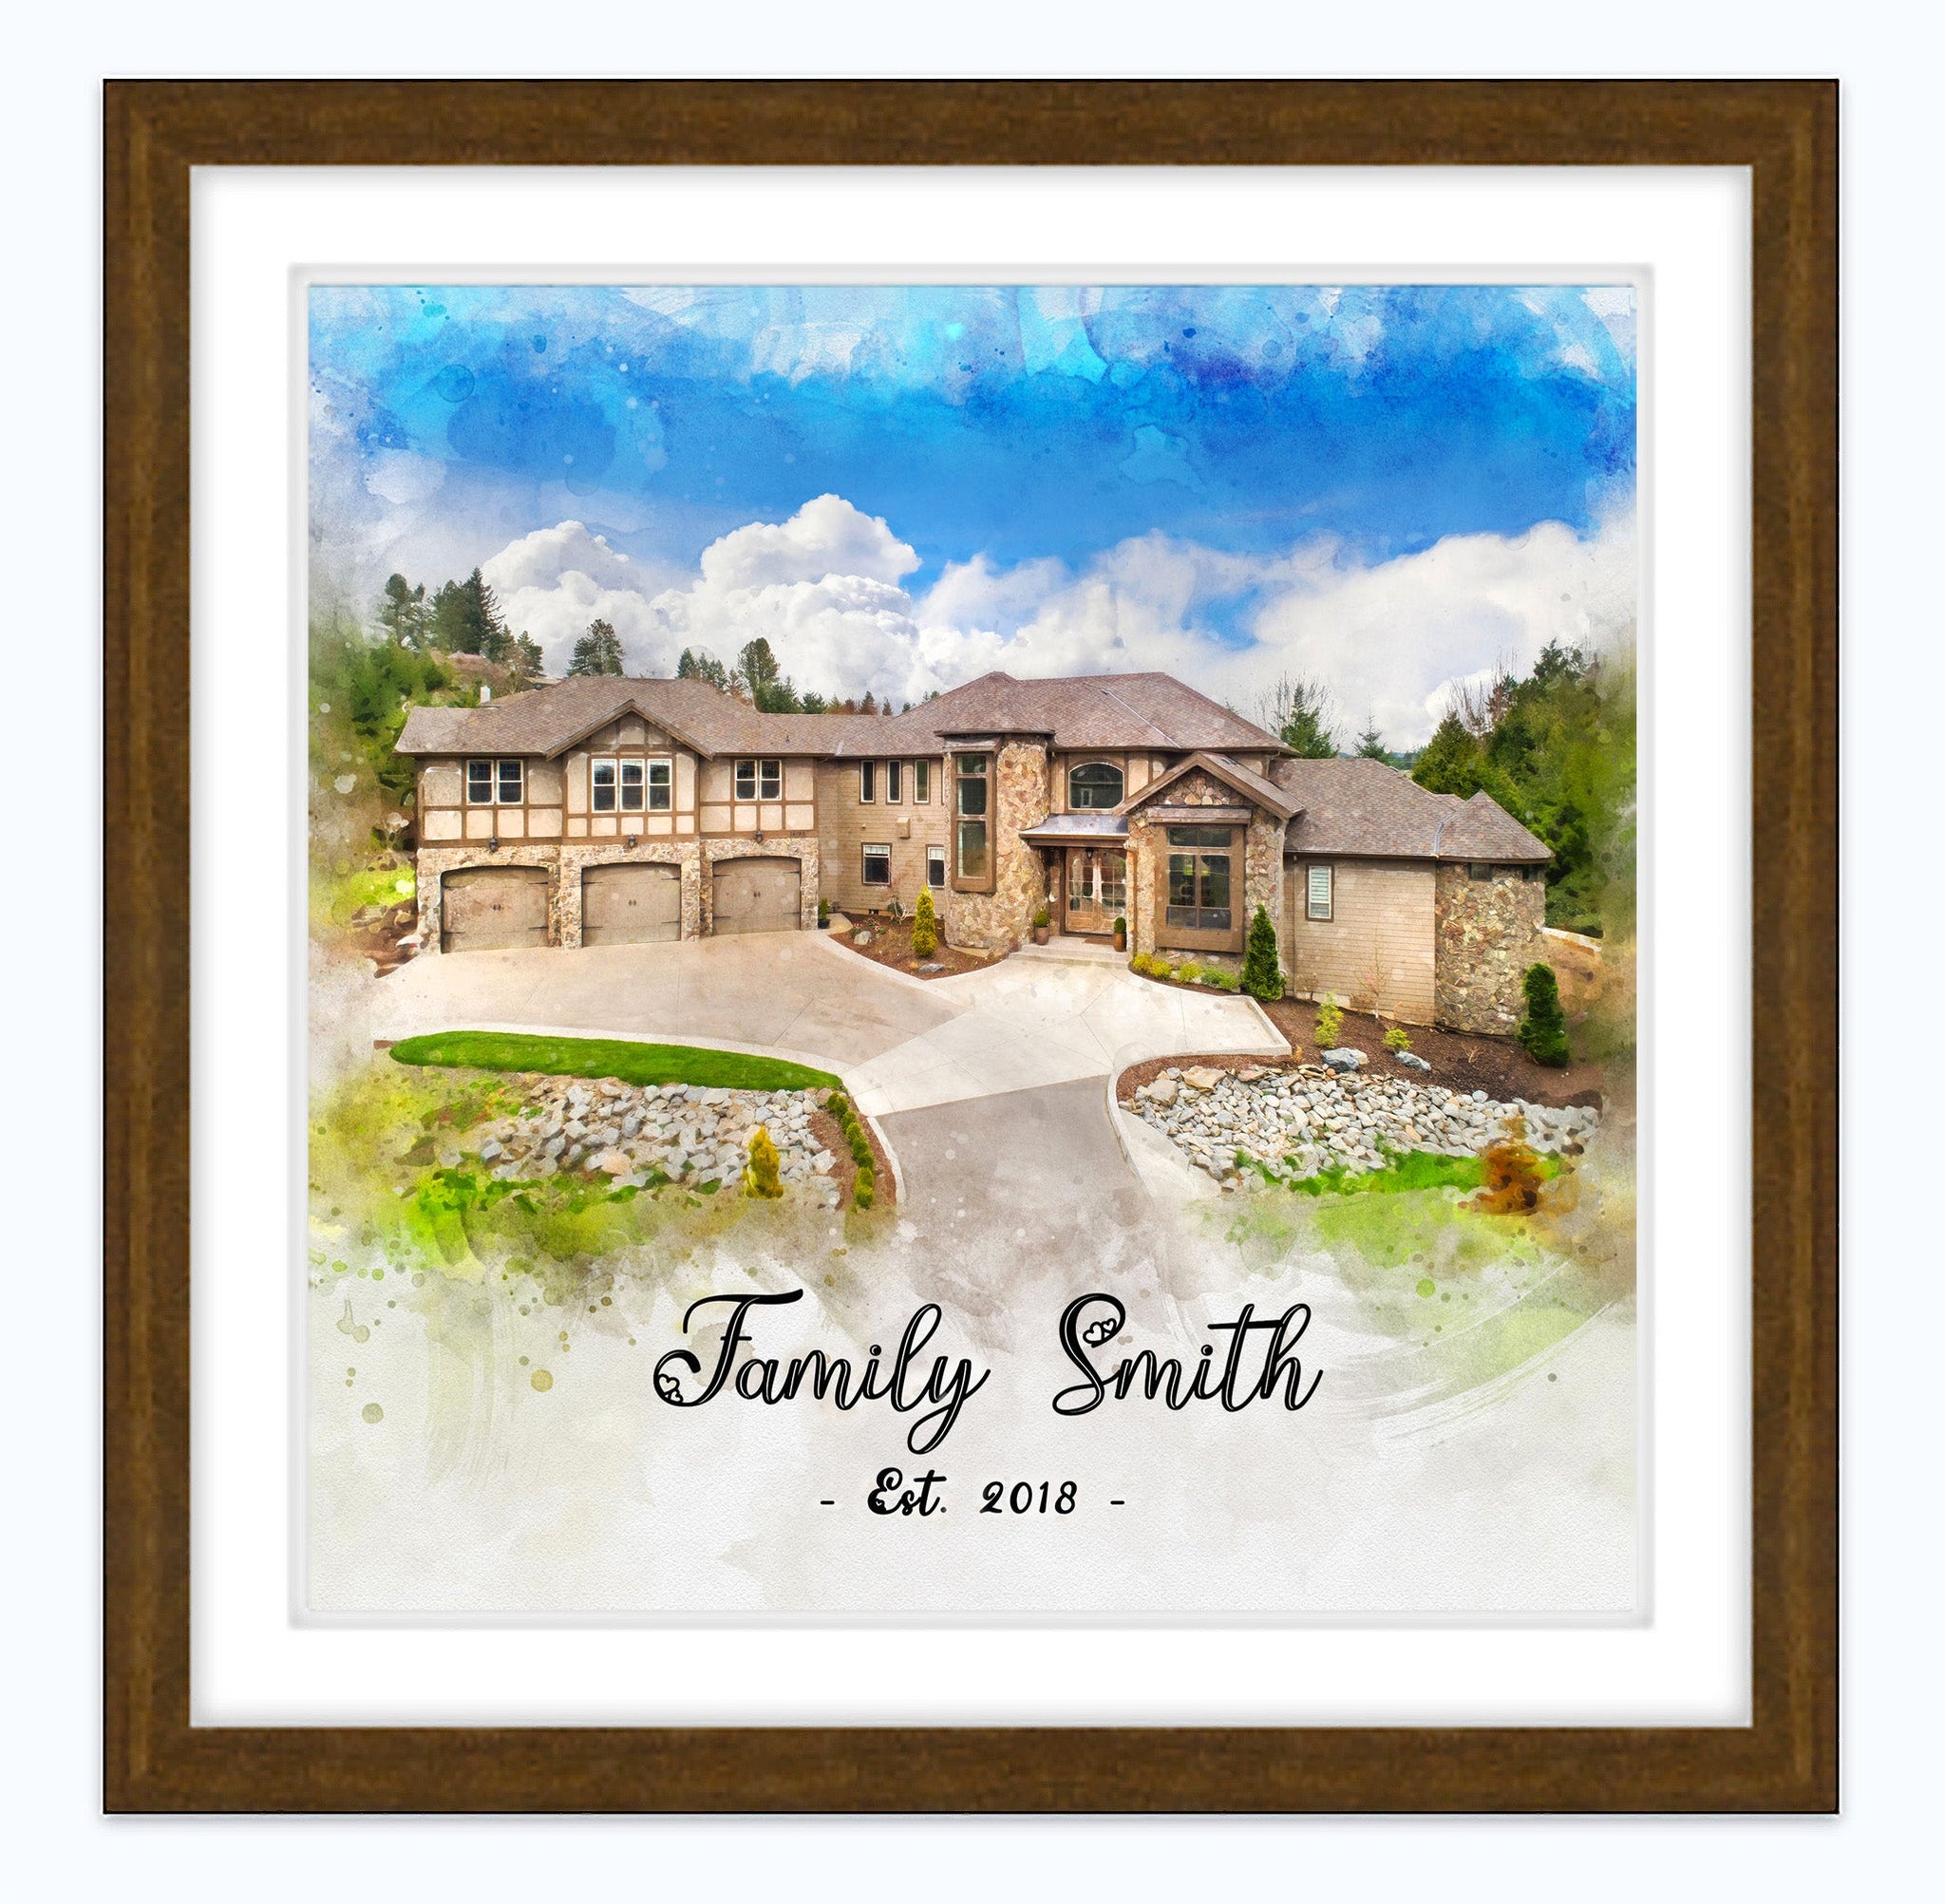 First-Time House Owner Gift | Realtor Closing Gifts | Gifts from Real Estate Agents |Custom House Portraits | Home Warming Gift Ideas - FromPicToArt